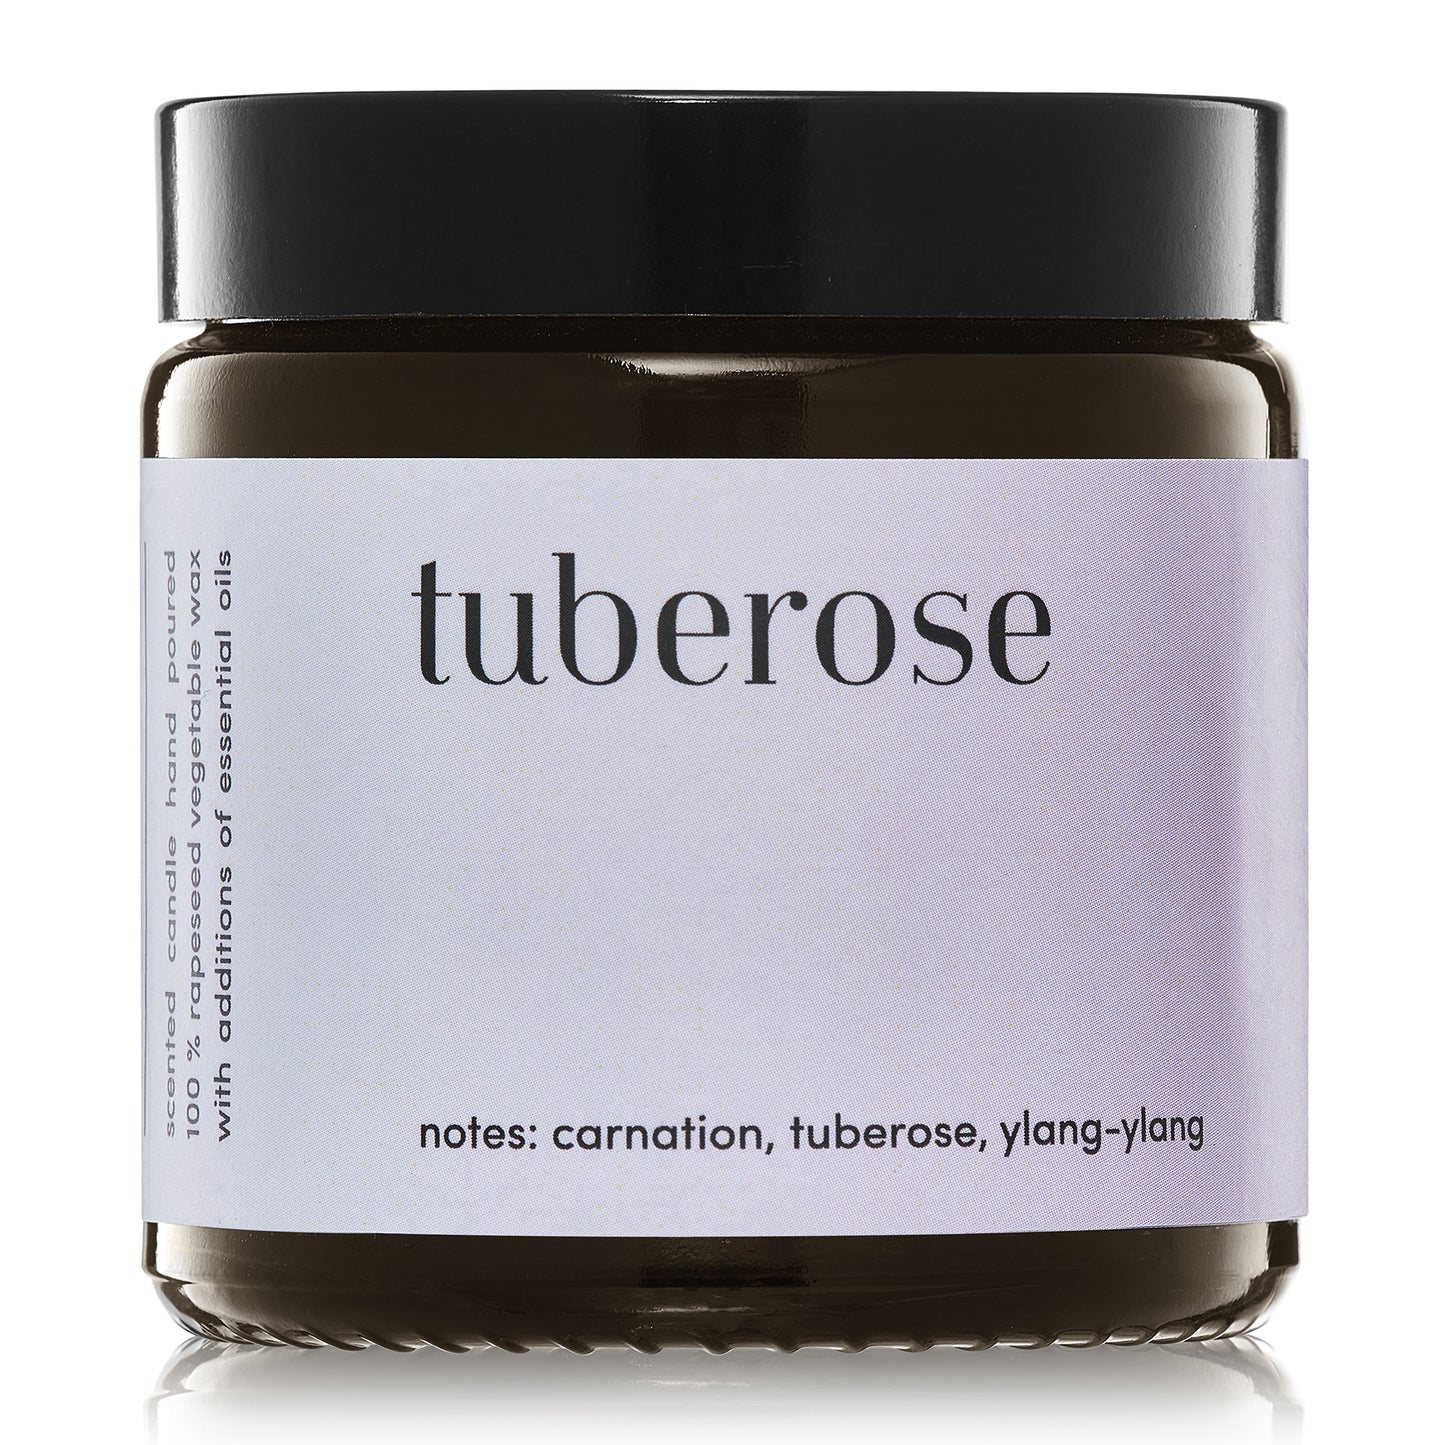 "Tuberose" scented candle 100% natural rapeseed wax 120g